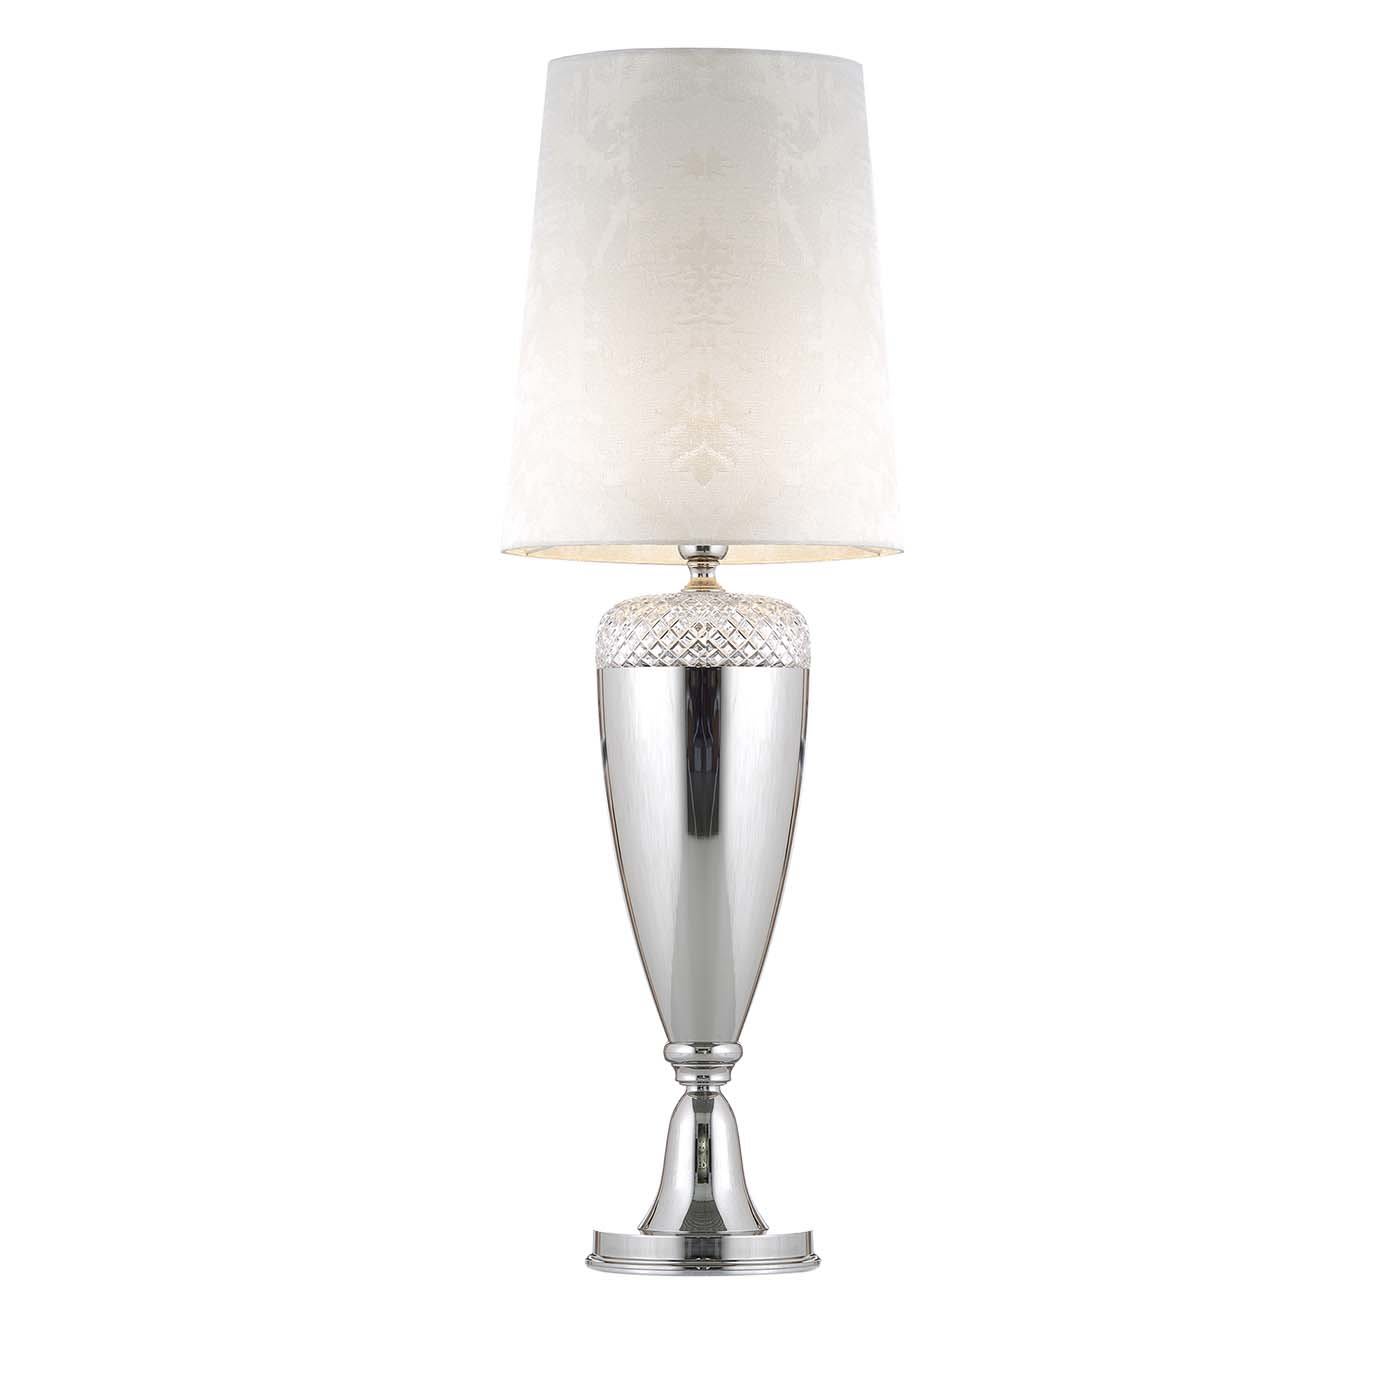 Metal and Crystal Table Lamp - Il Paralume Marina